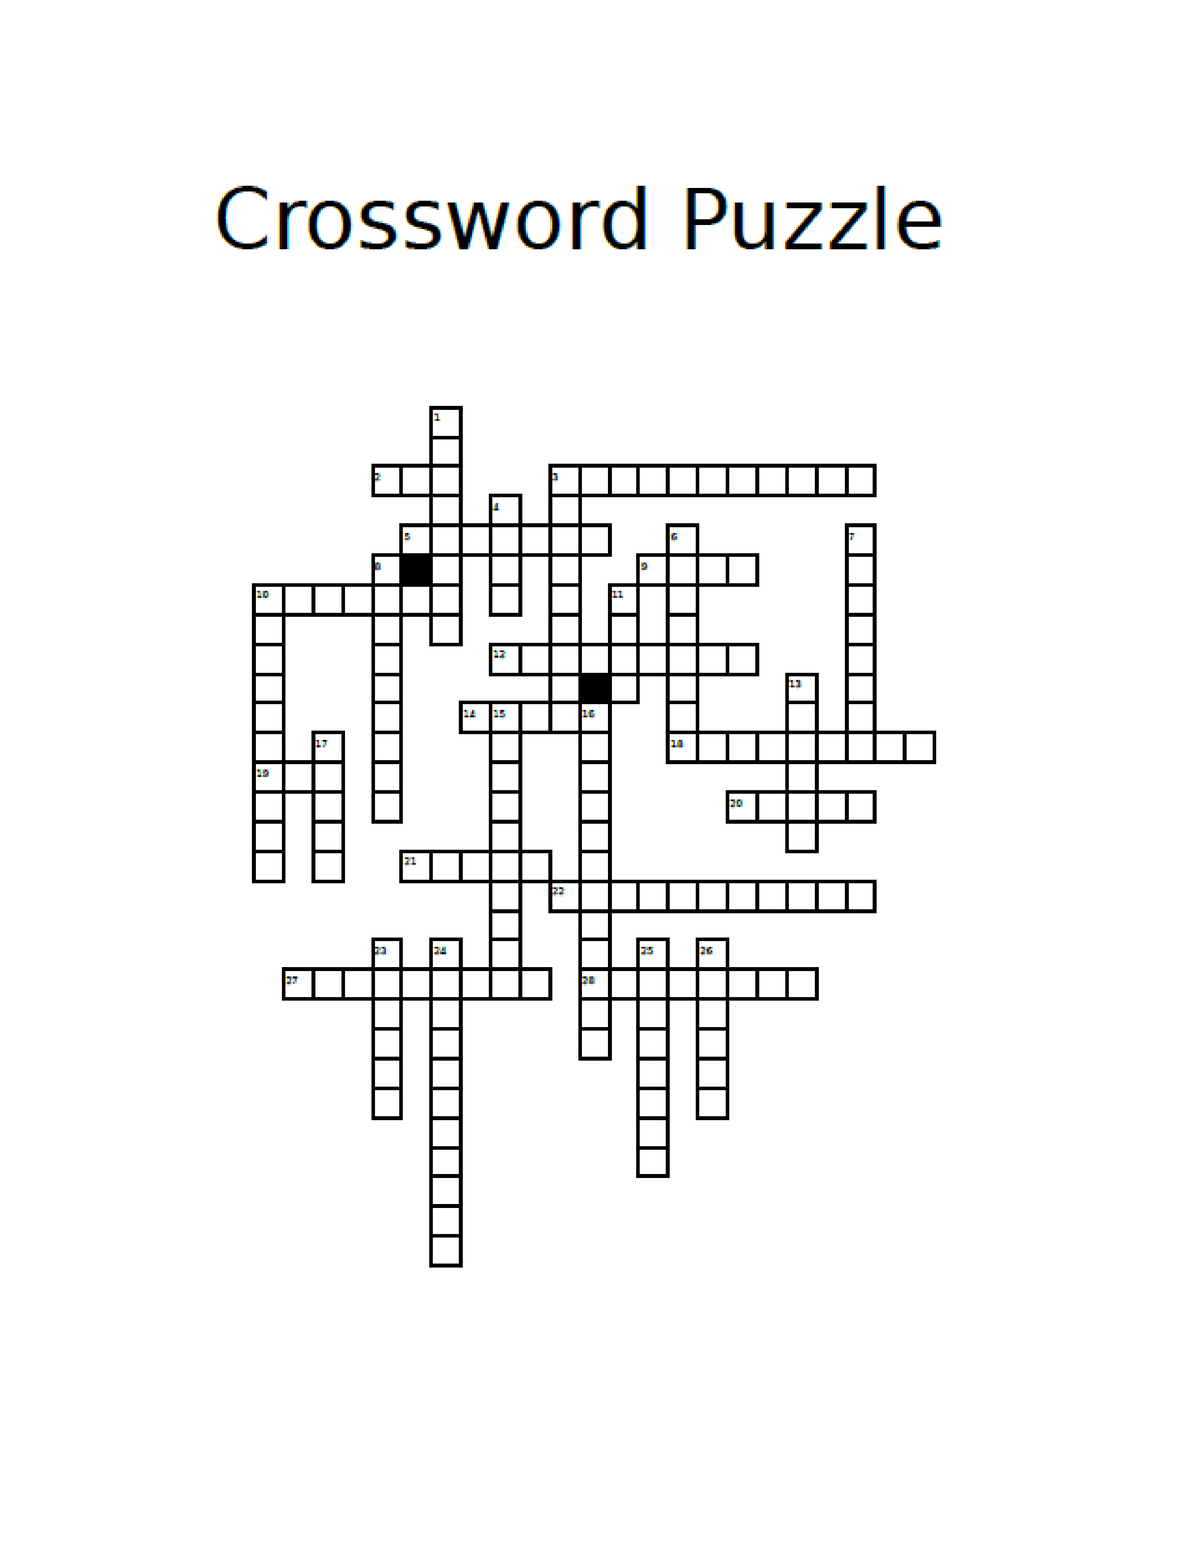 Crossword Puzzle Review DOWN Increased adhesiveness is an